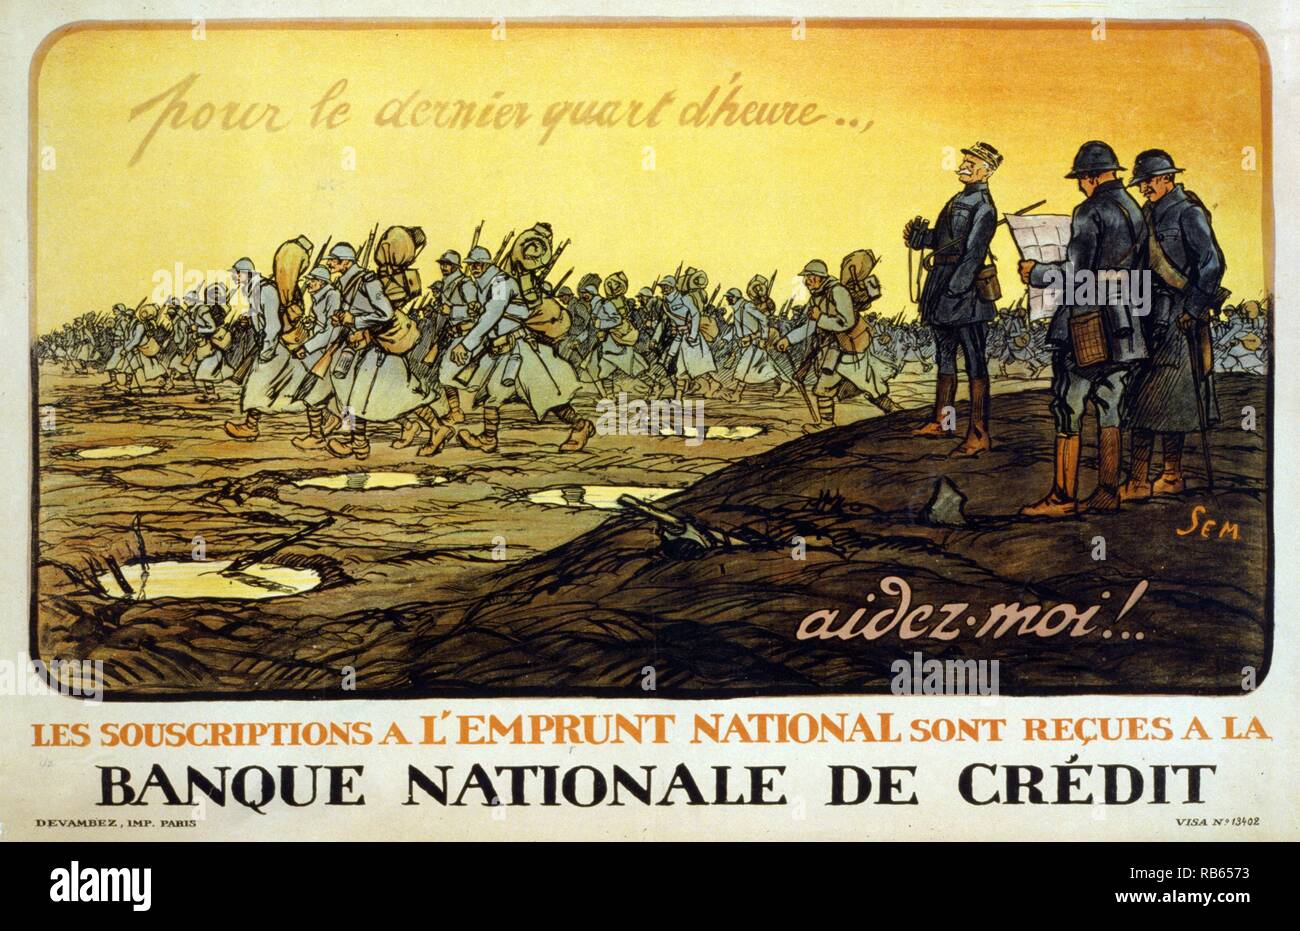 For the last quarter hour . . . Help me! Subscriptions of the National Loan available at the Banque Nationale de Credit. Gen. Ferdinand Foch (1851-1929) overseeing his troops as they march across the battlefield. Foch was appointed commander in chief of the Allied armies in 1918. Stock Photo